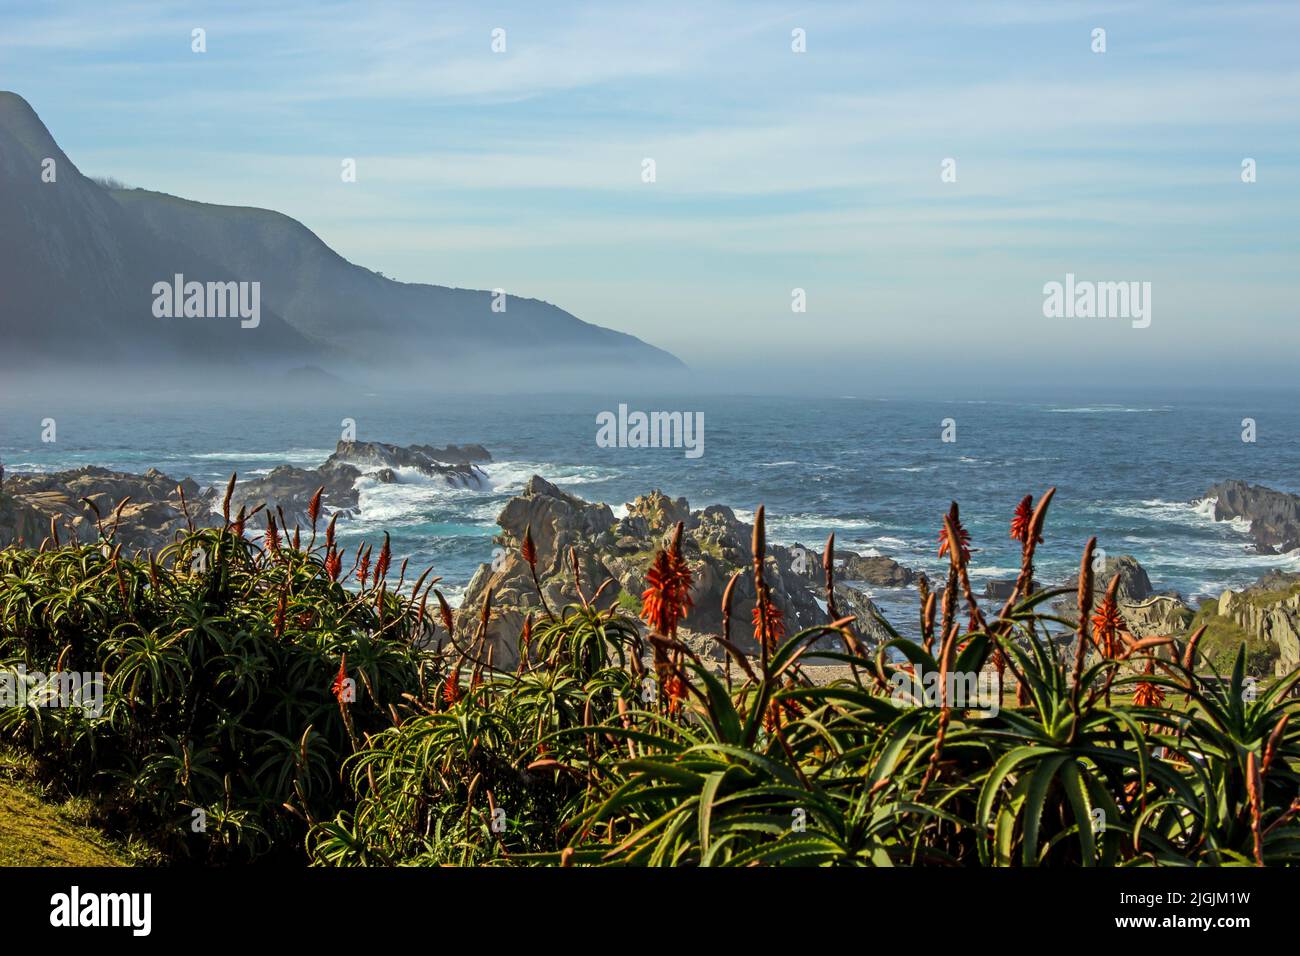 View were the Tsitsikamma Mountains meets the ocean, with the vibrant reddish-orange flowers of the Kranz Aloe in the Foreground Stock Photo